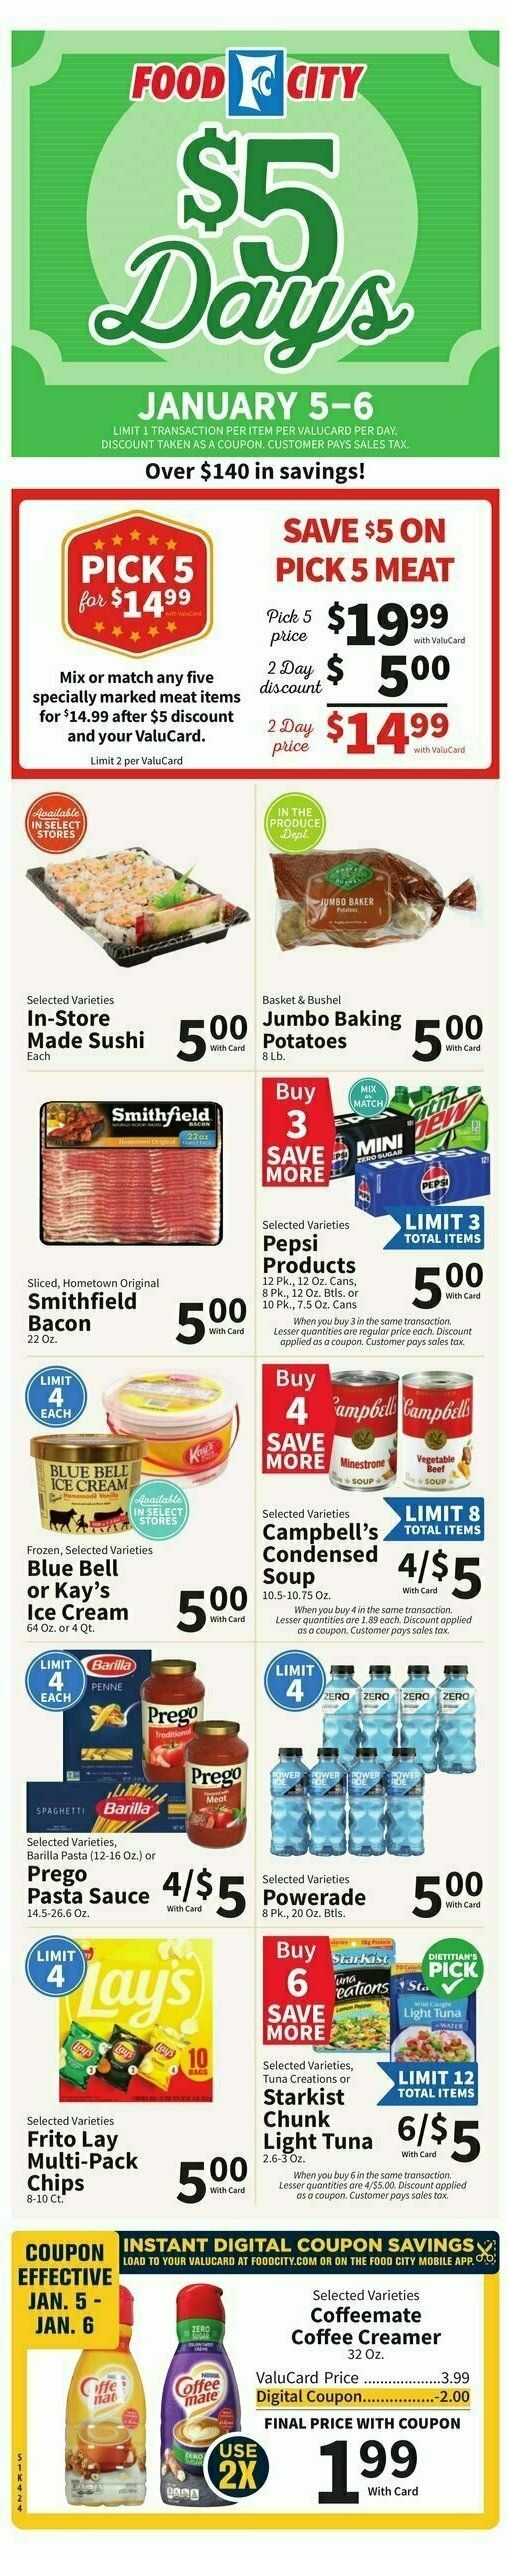 Food City Weekly Ad from January 3